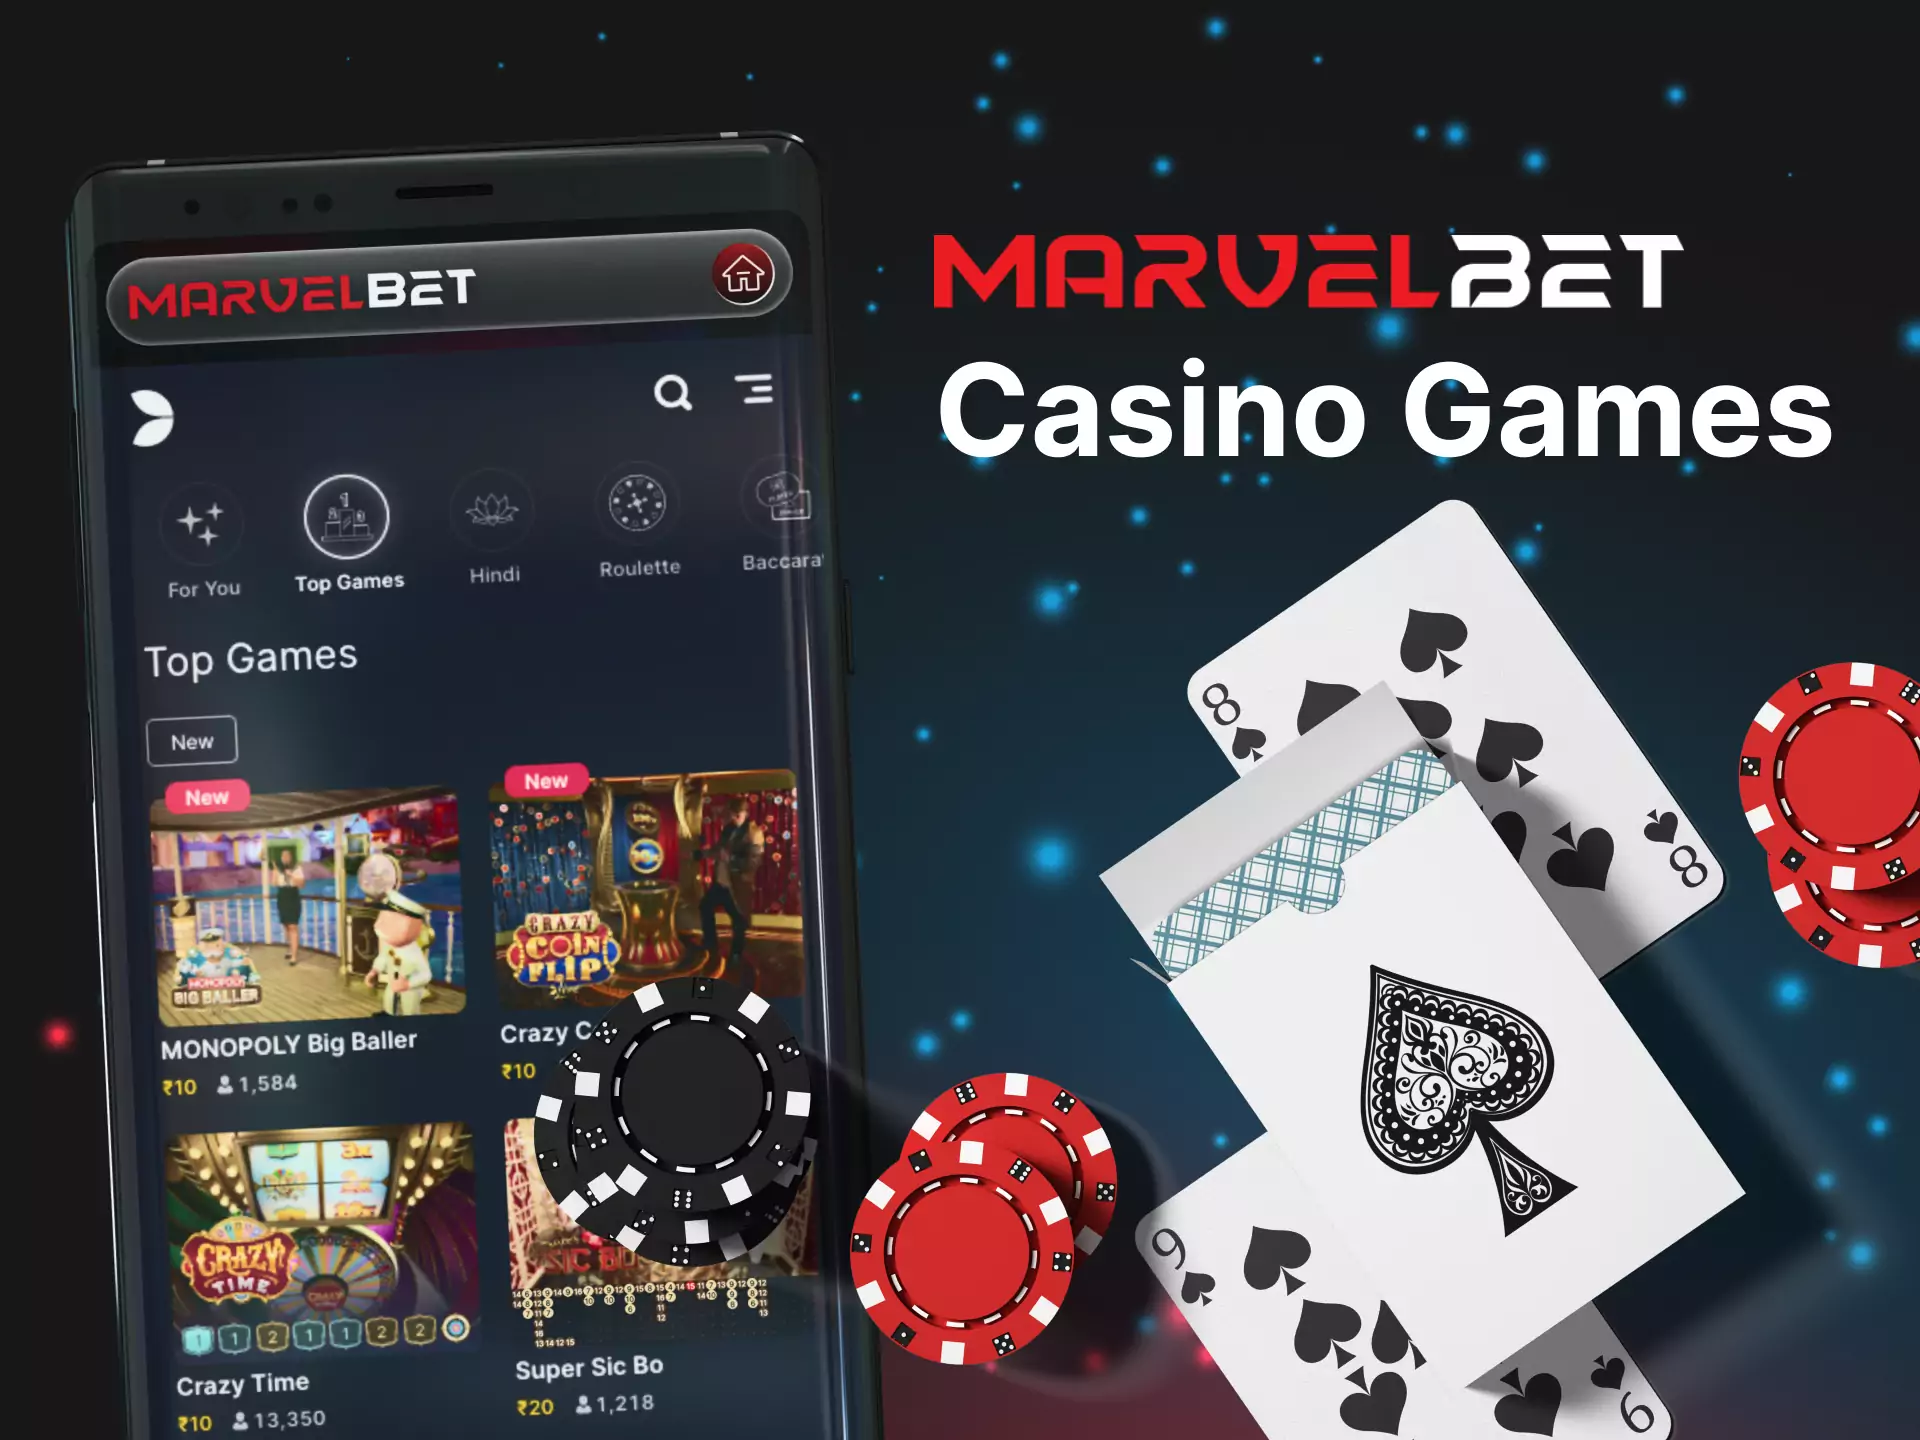 In the Marvelbet Casino, you can play all the traditional fortune games.